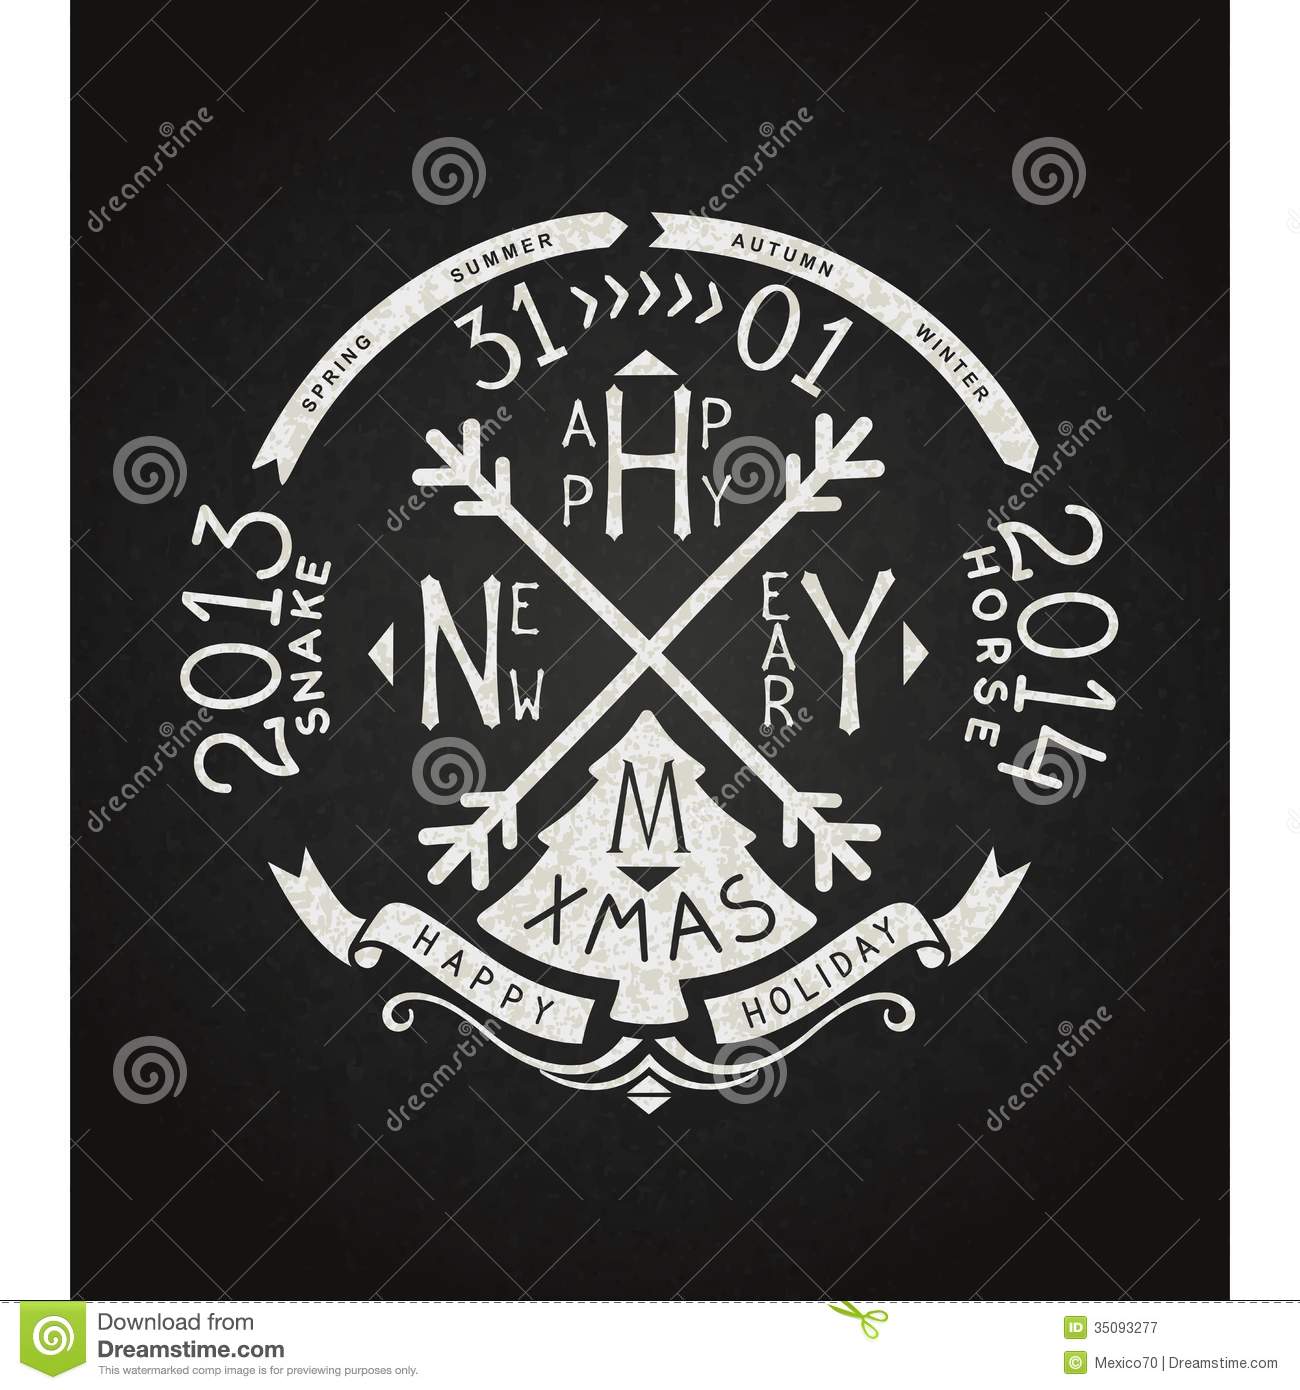 Happy New Year Vector Retro Chalkboard Lettering Royalty Free Stock